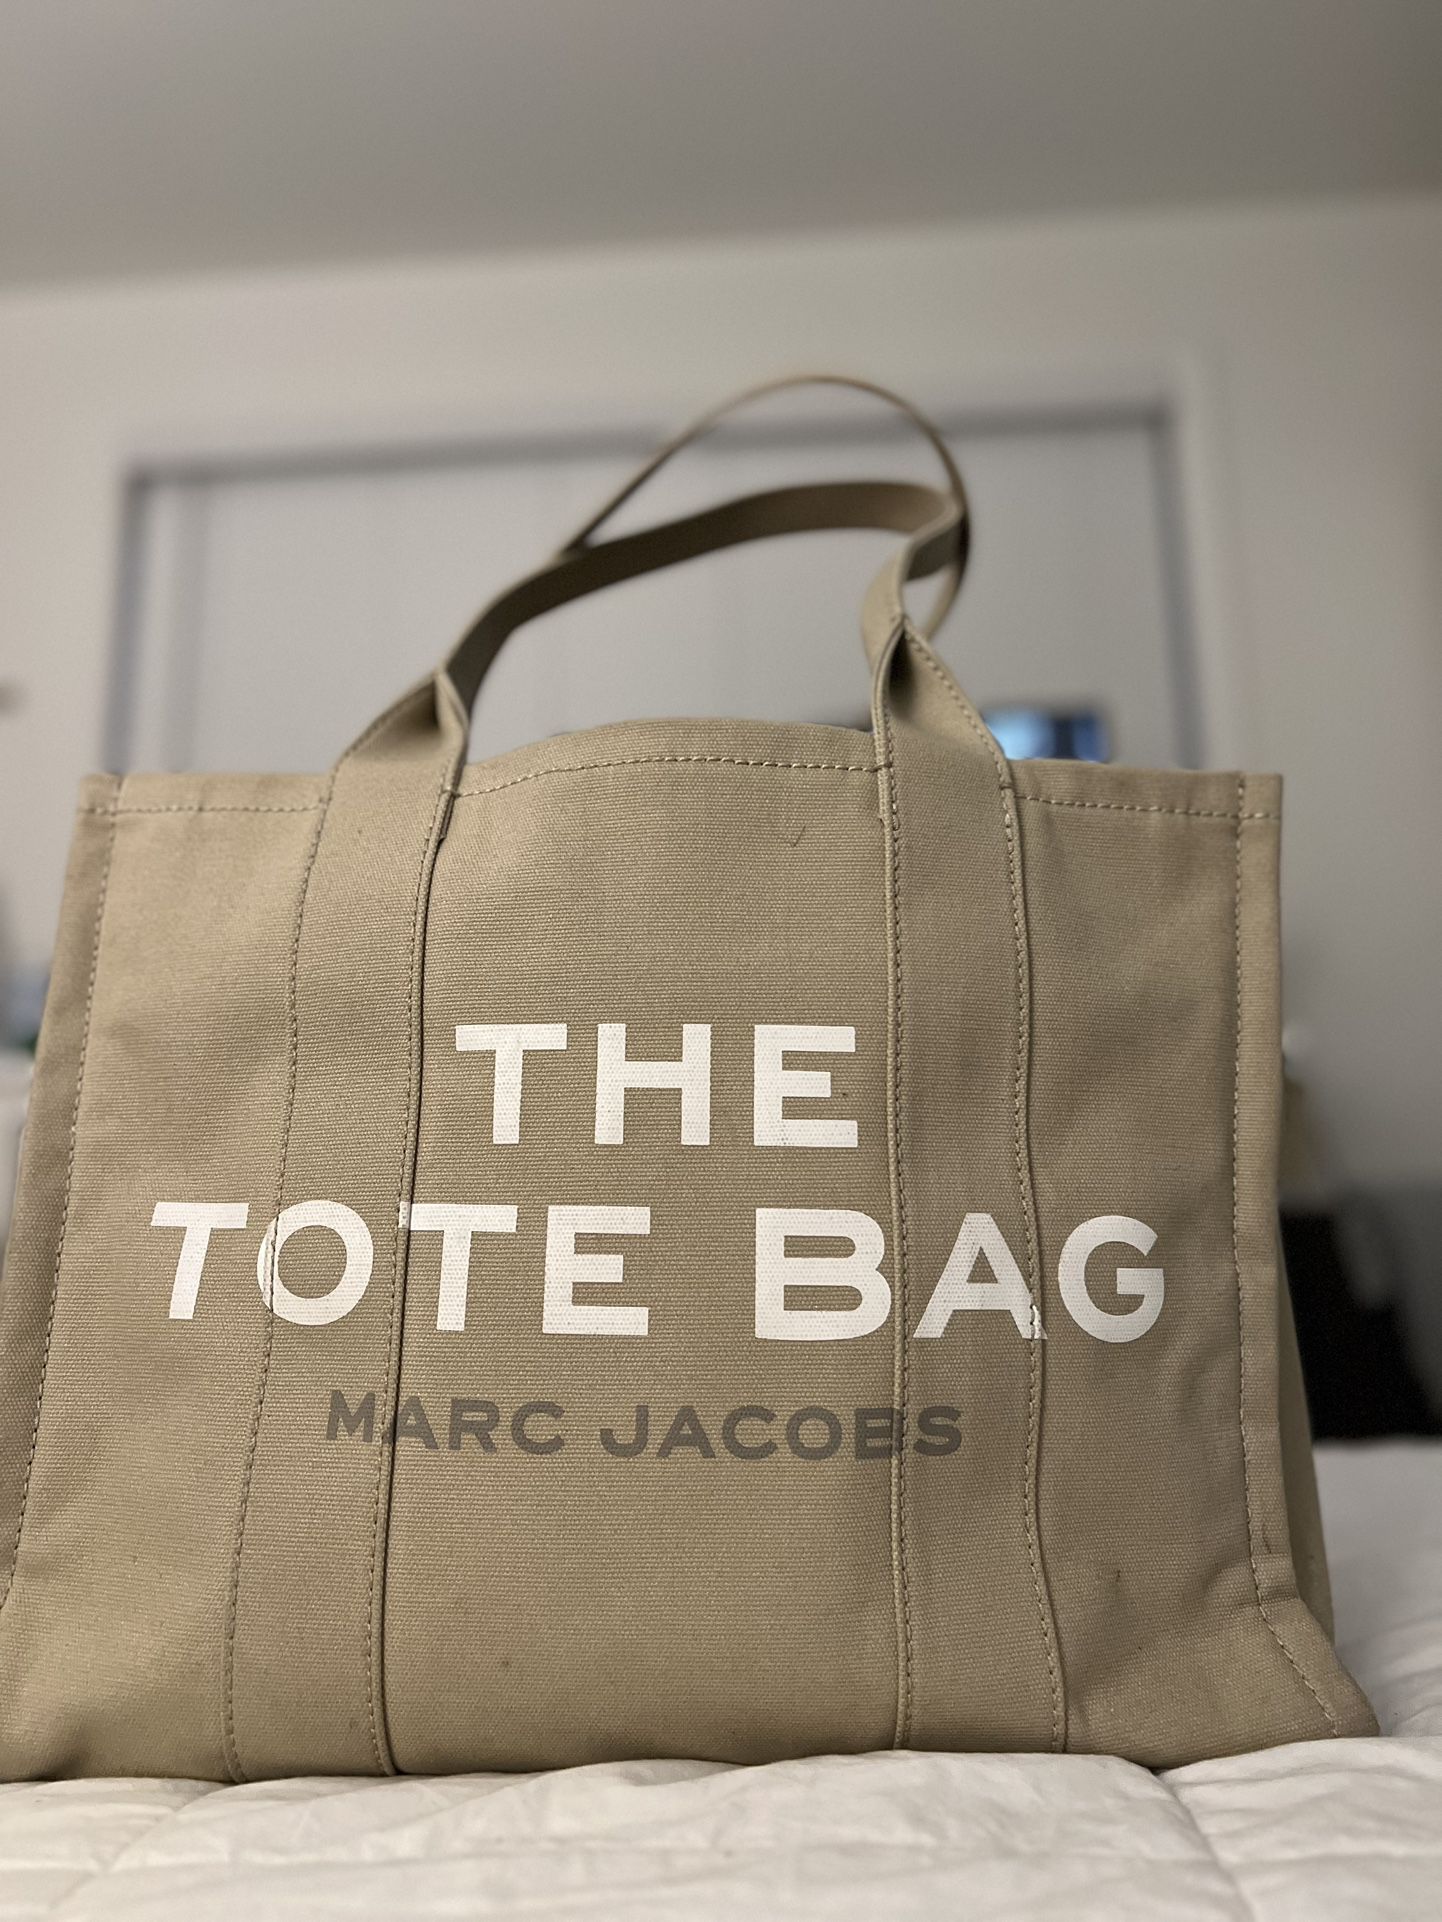 The Large Tote Bag  - Marc Jacobs